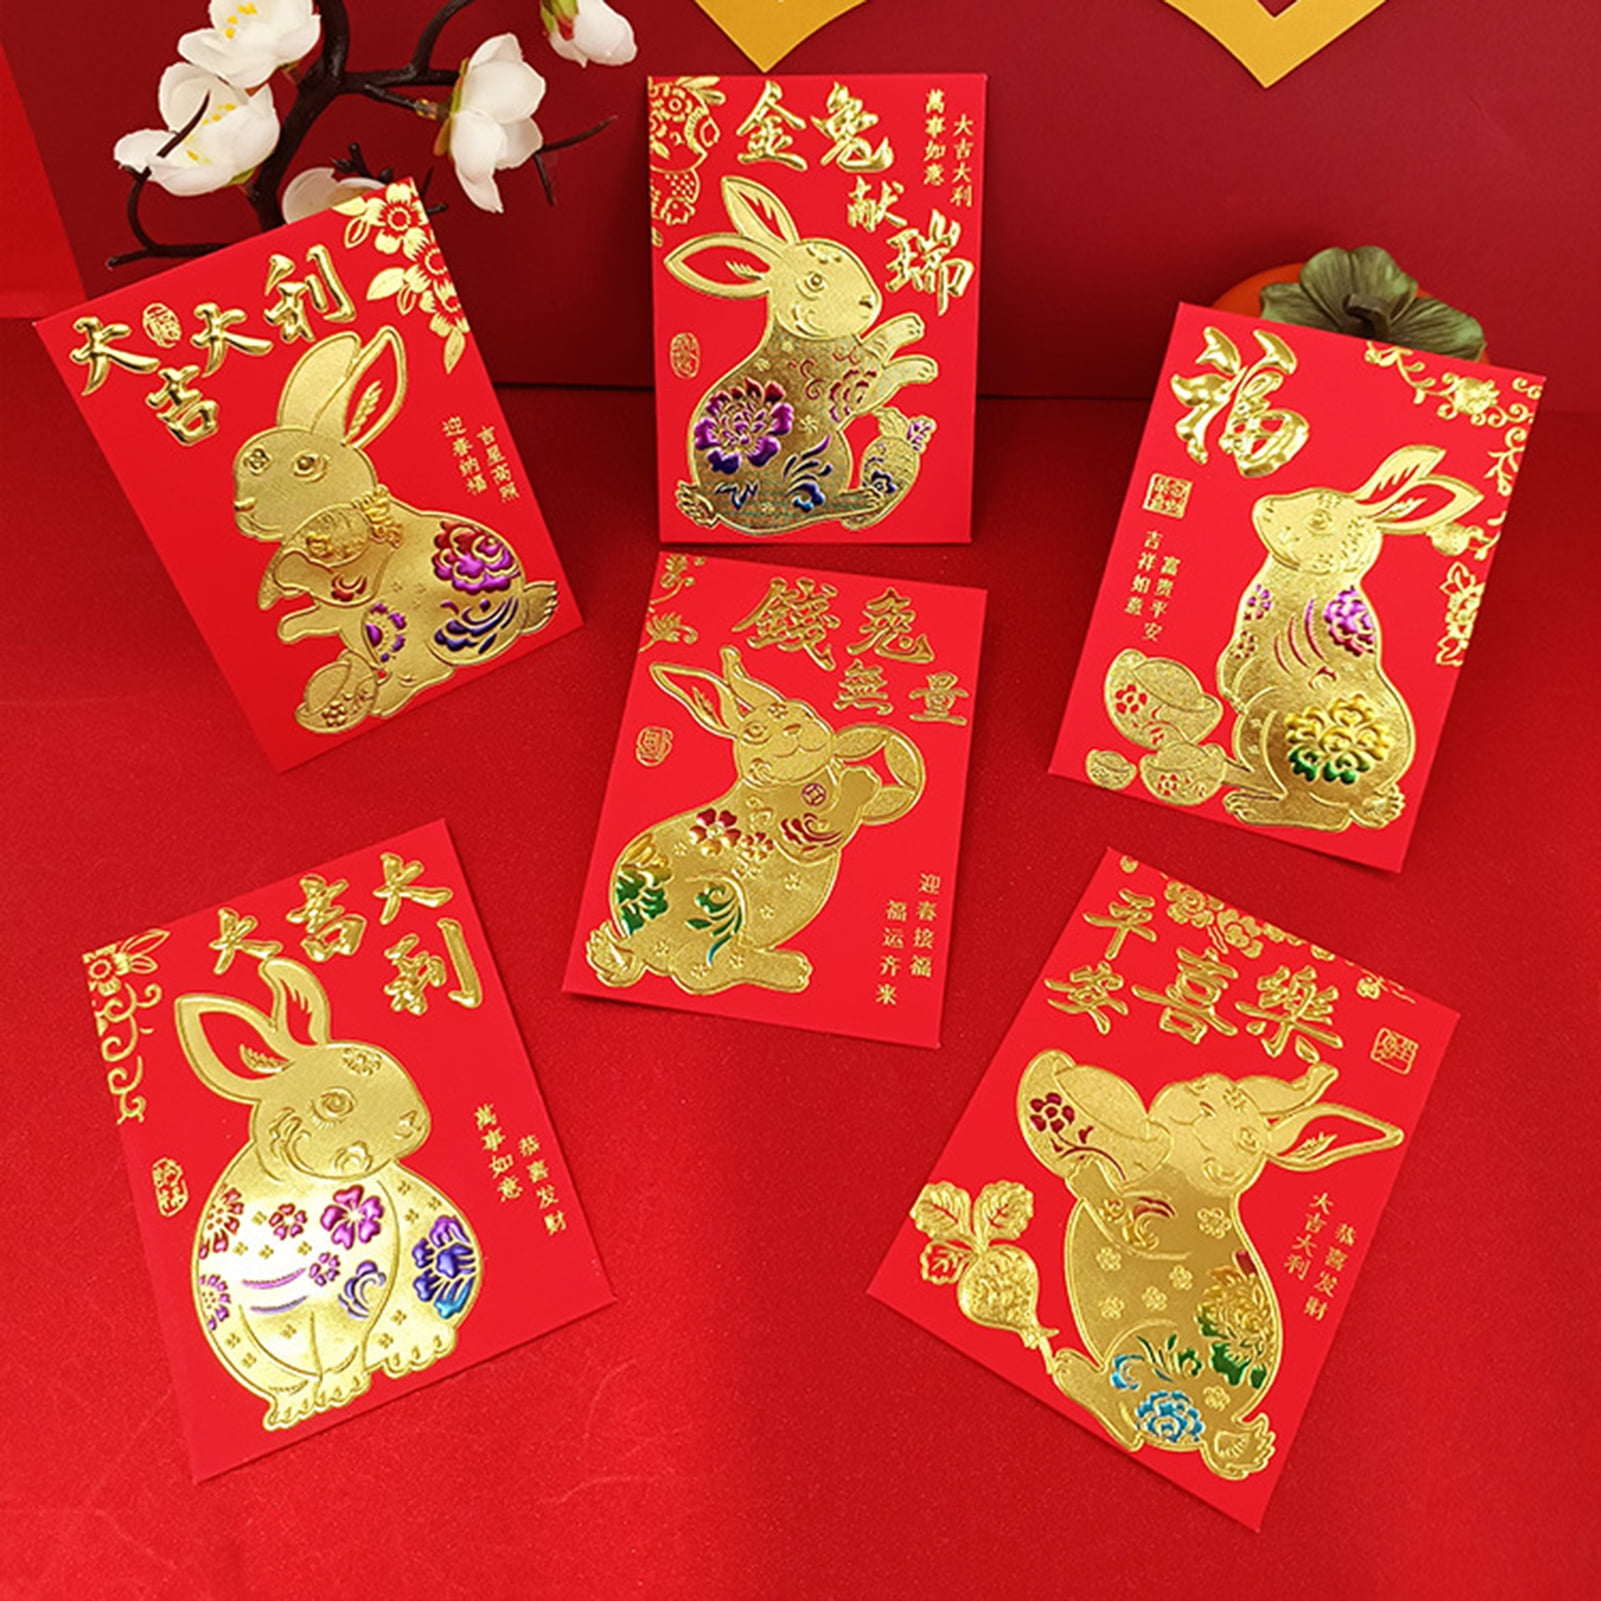 12Pcs Rabbit Red Envelope Lovely Enrich Atmosphere Specialty Paper New Year  Cute Bunny Print Red Envelopes for Festival